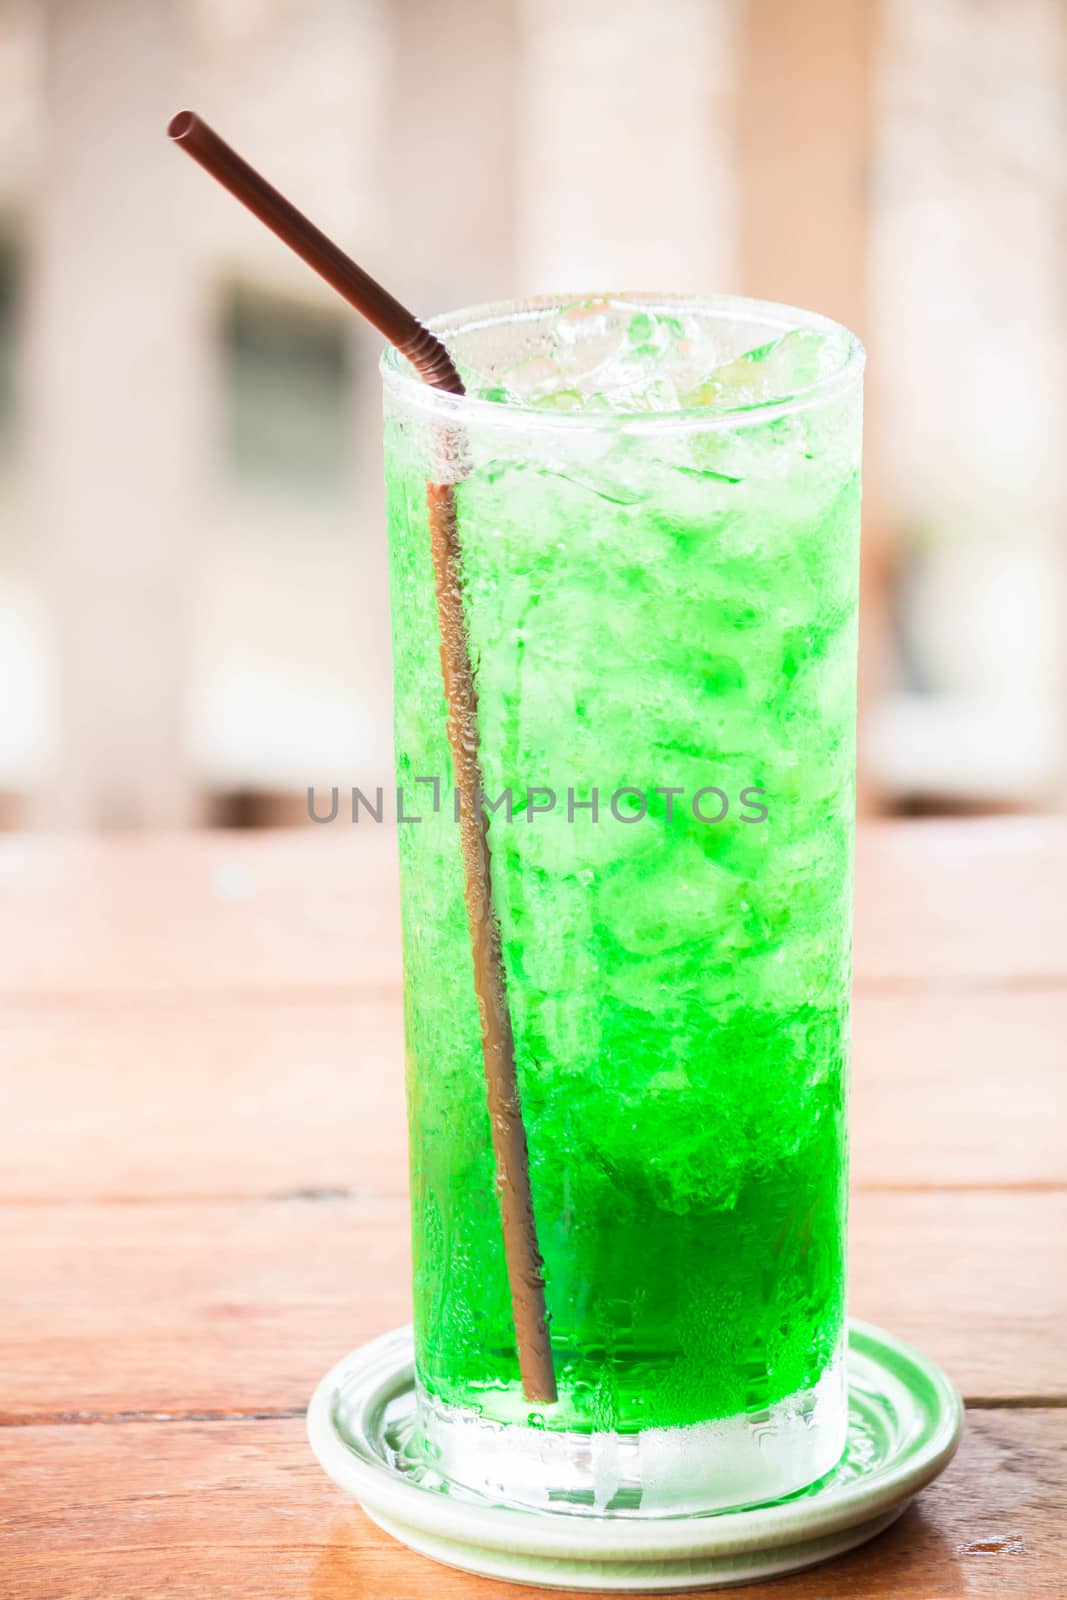 Relaxing with iced green drink on table by punsayaporn